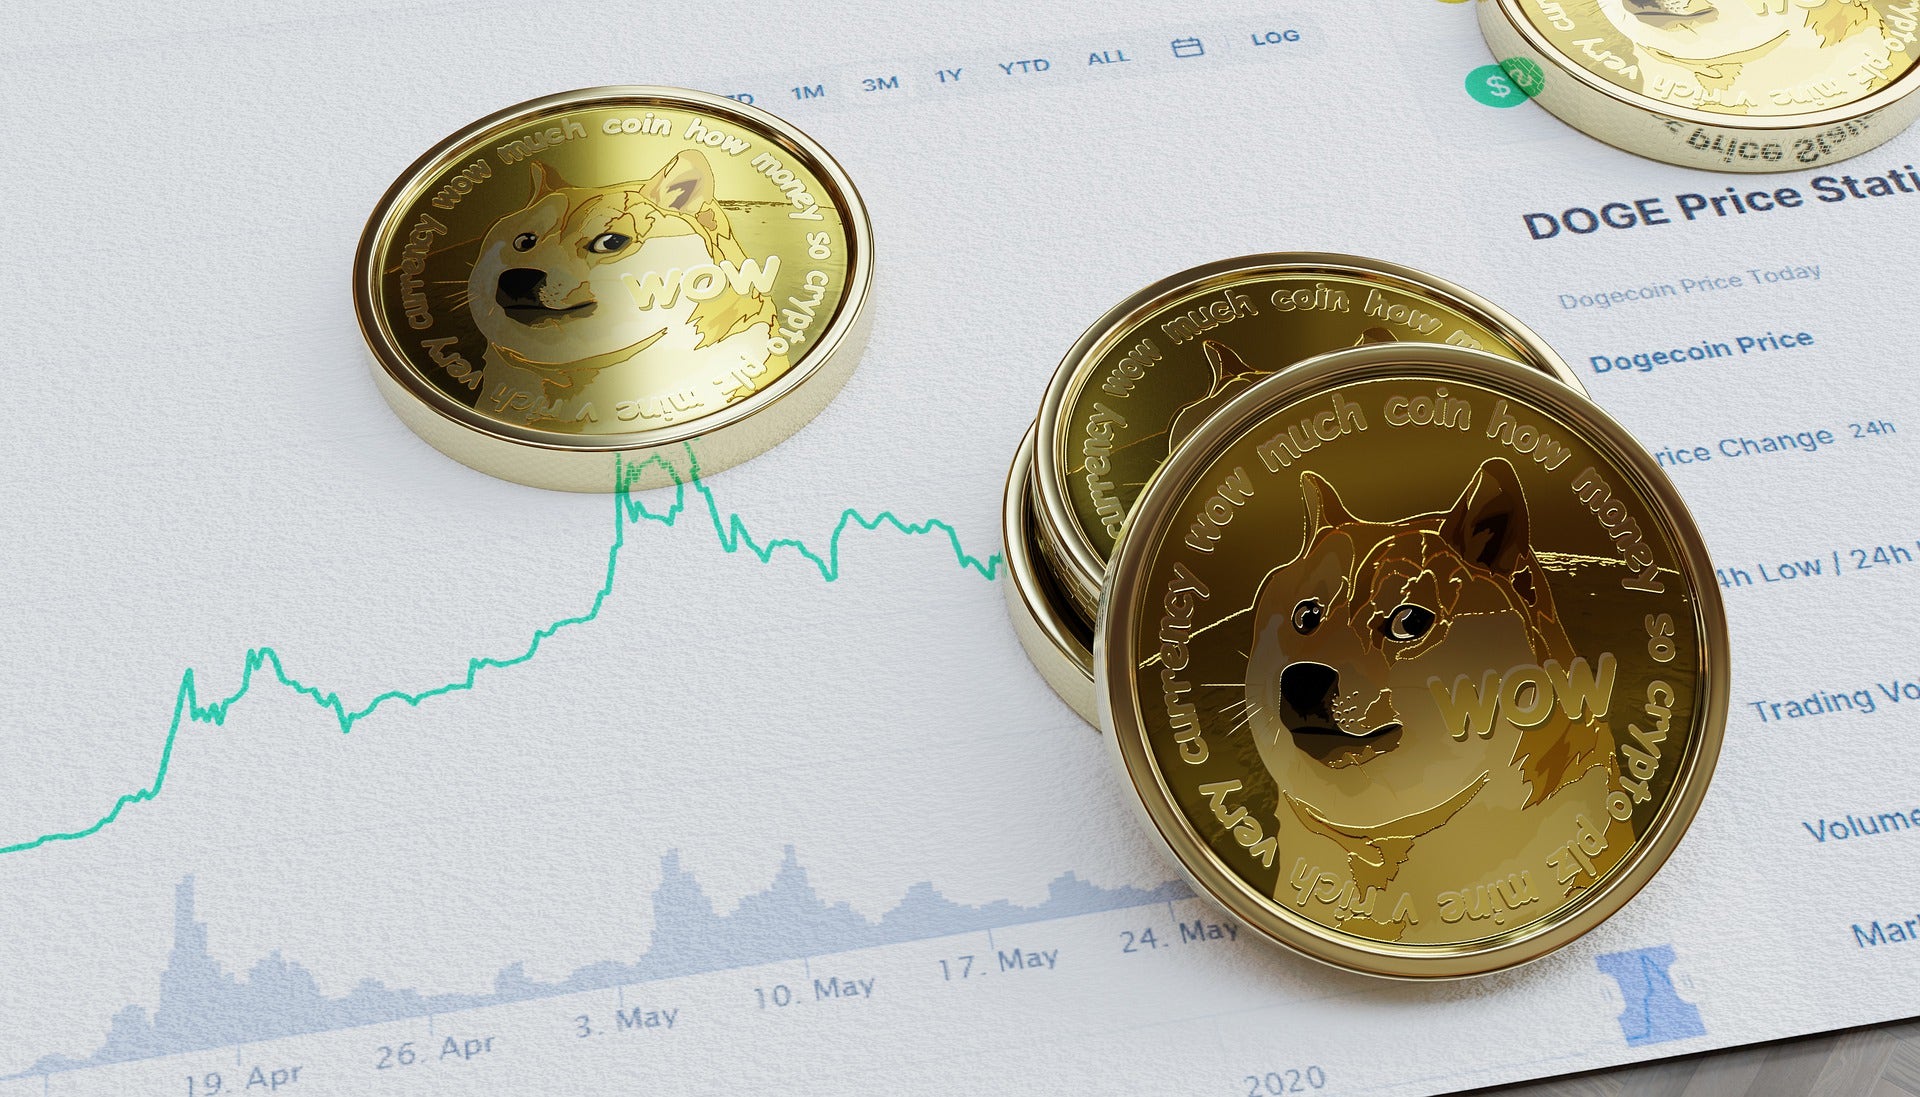 Bad Dog! Is Dogecoin Headed To 5 Cents? Here's Why Bulls Need To Step In